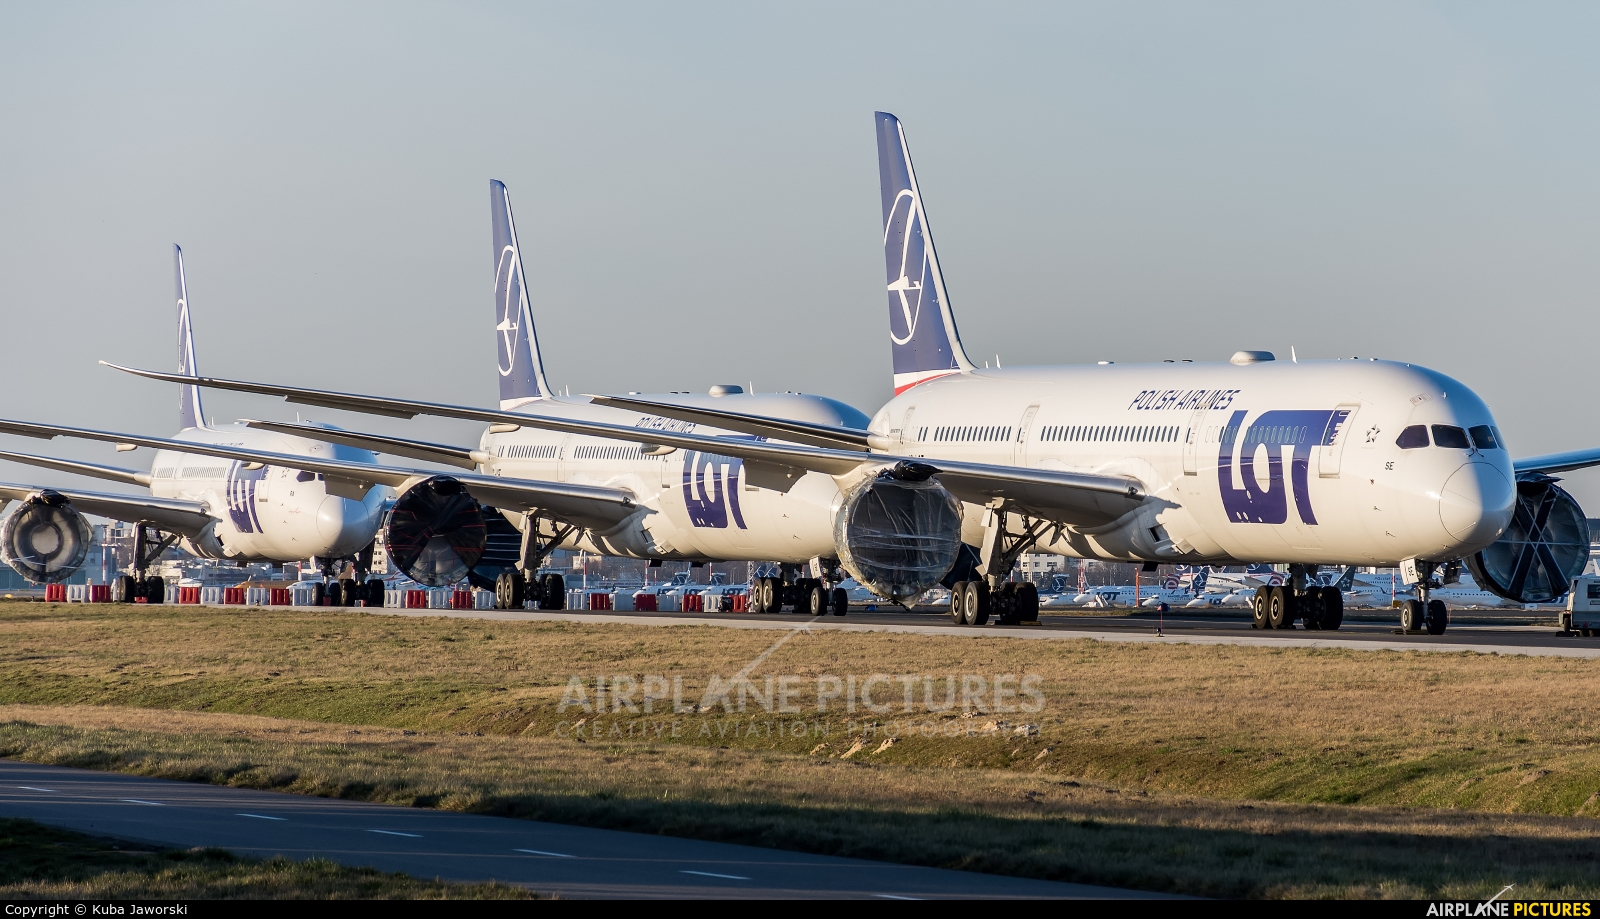 LOT - Polish Airlines SP-LSE aircraft at Warsaw - Frederic Chopin